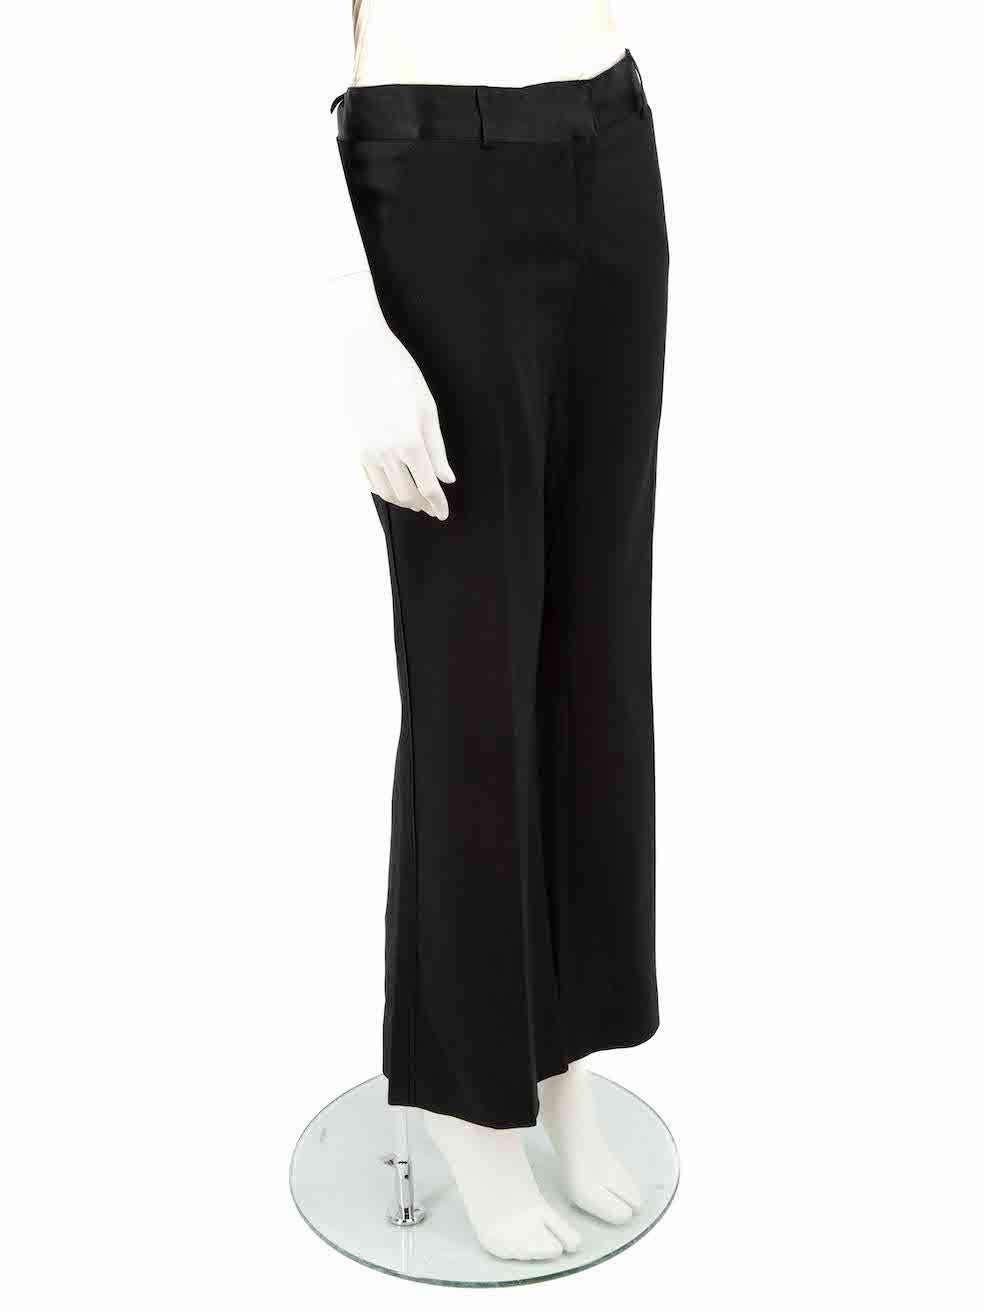 CONDITION is Very good. Hardly any visible wear to trousers is evident on this used Diane Von Furstenberg designer resale item.
 
 Details
 Black
 Synthetic
 Wide leg trousers
 Low rise
 Satin waistband
 Belt hoops
 Front zip closure with clasps and